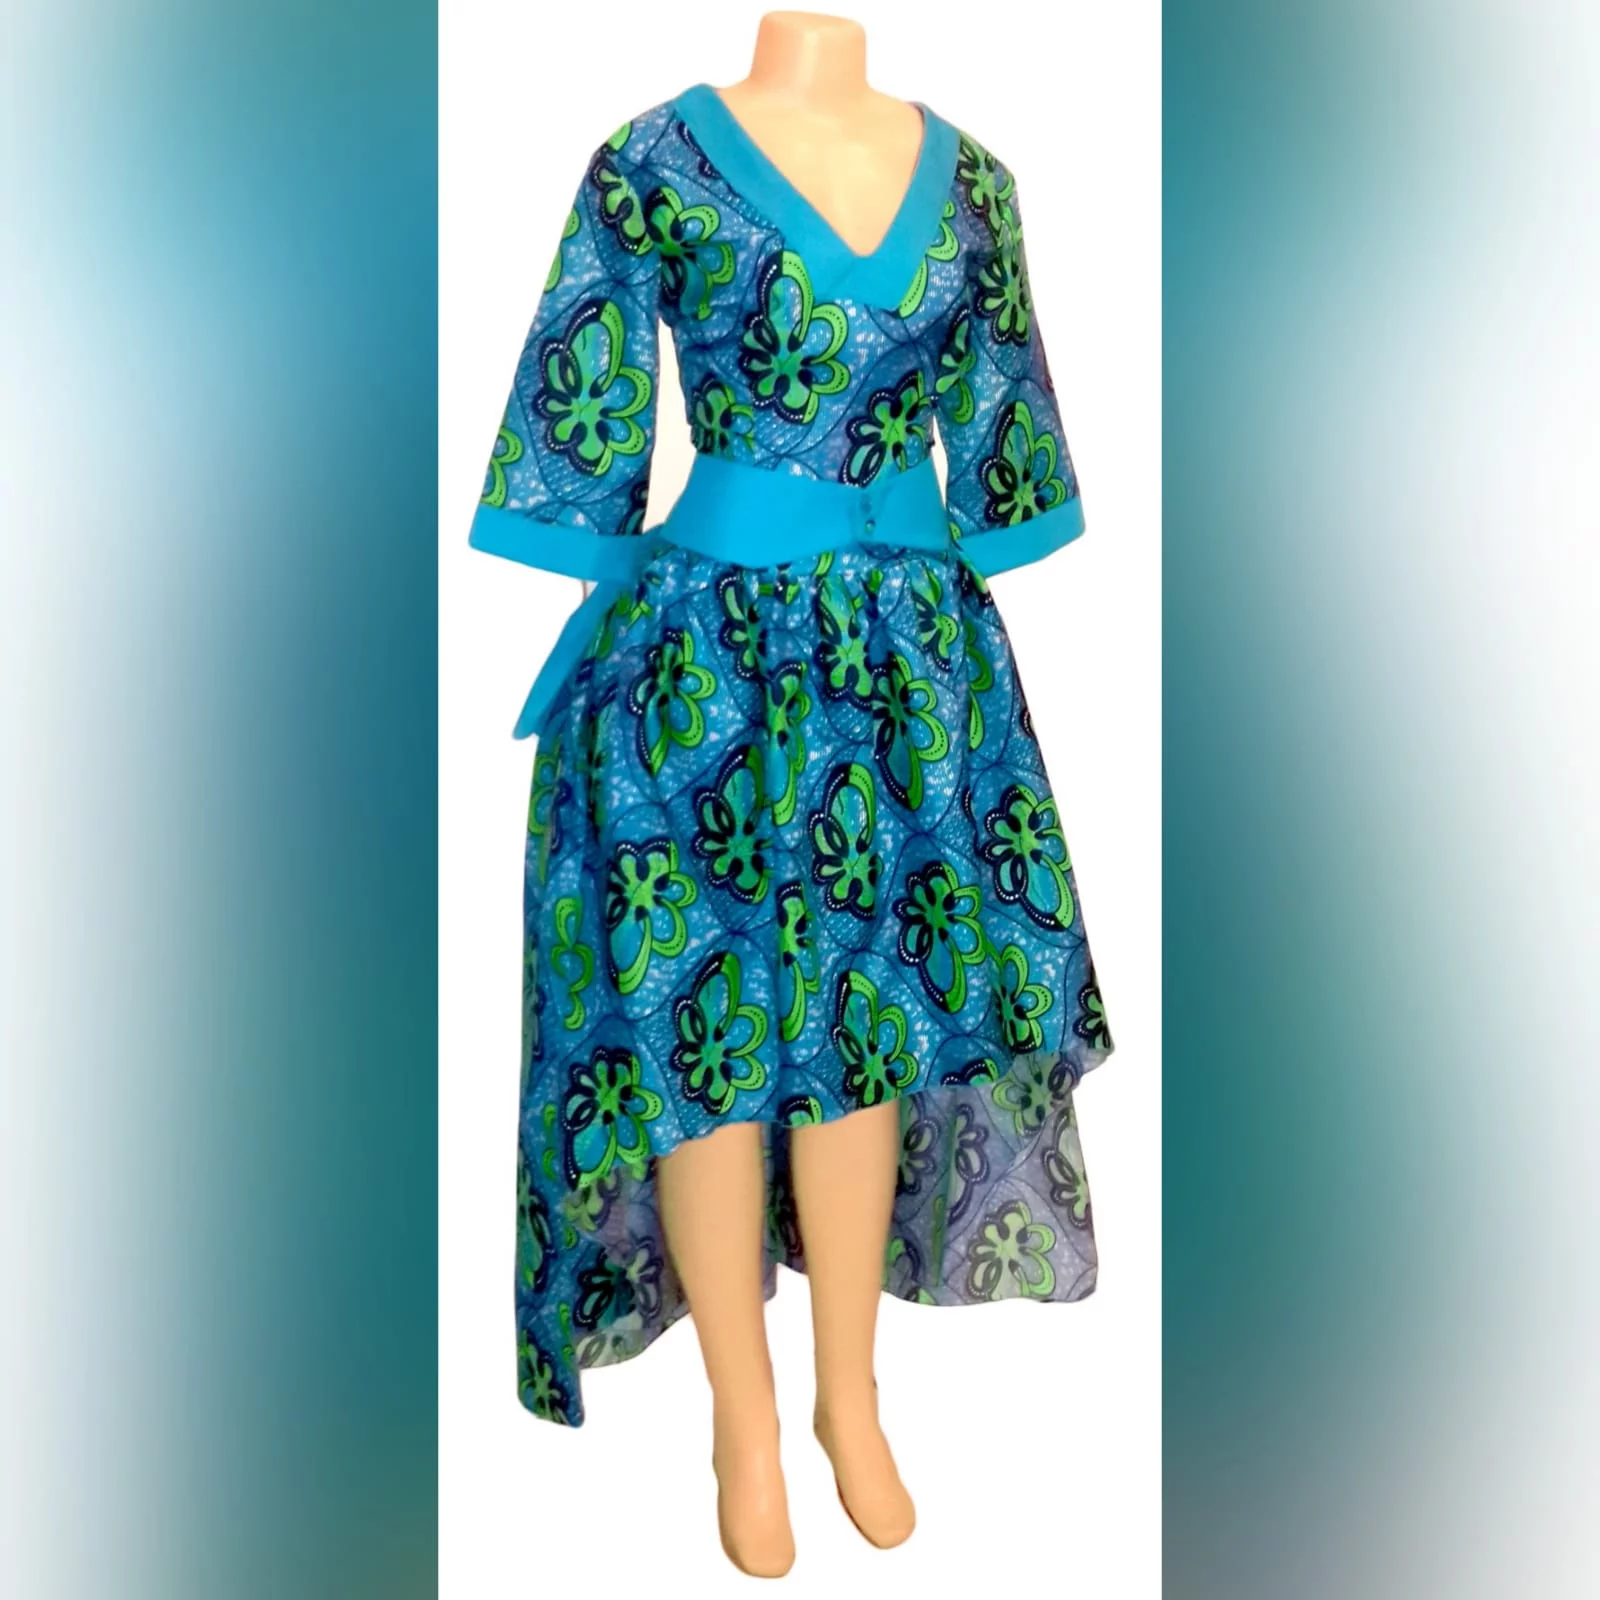 Modern traditional green and blue high low dress 5 modern traditional green and blue hi lo dress with a v neckline, 3/4 sleeves and a back peplum with a waistbelt. Matching doek.